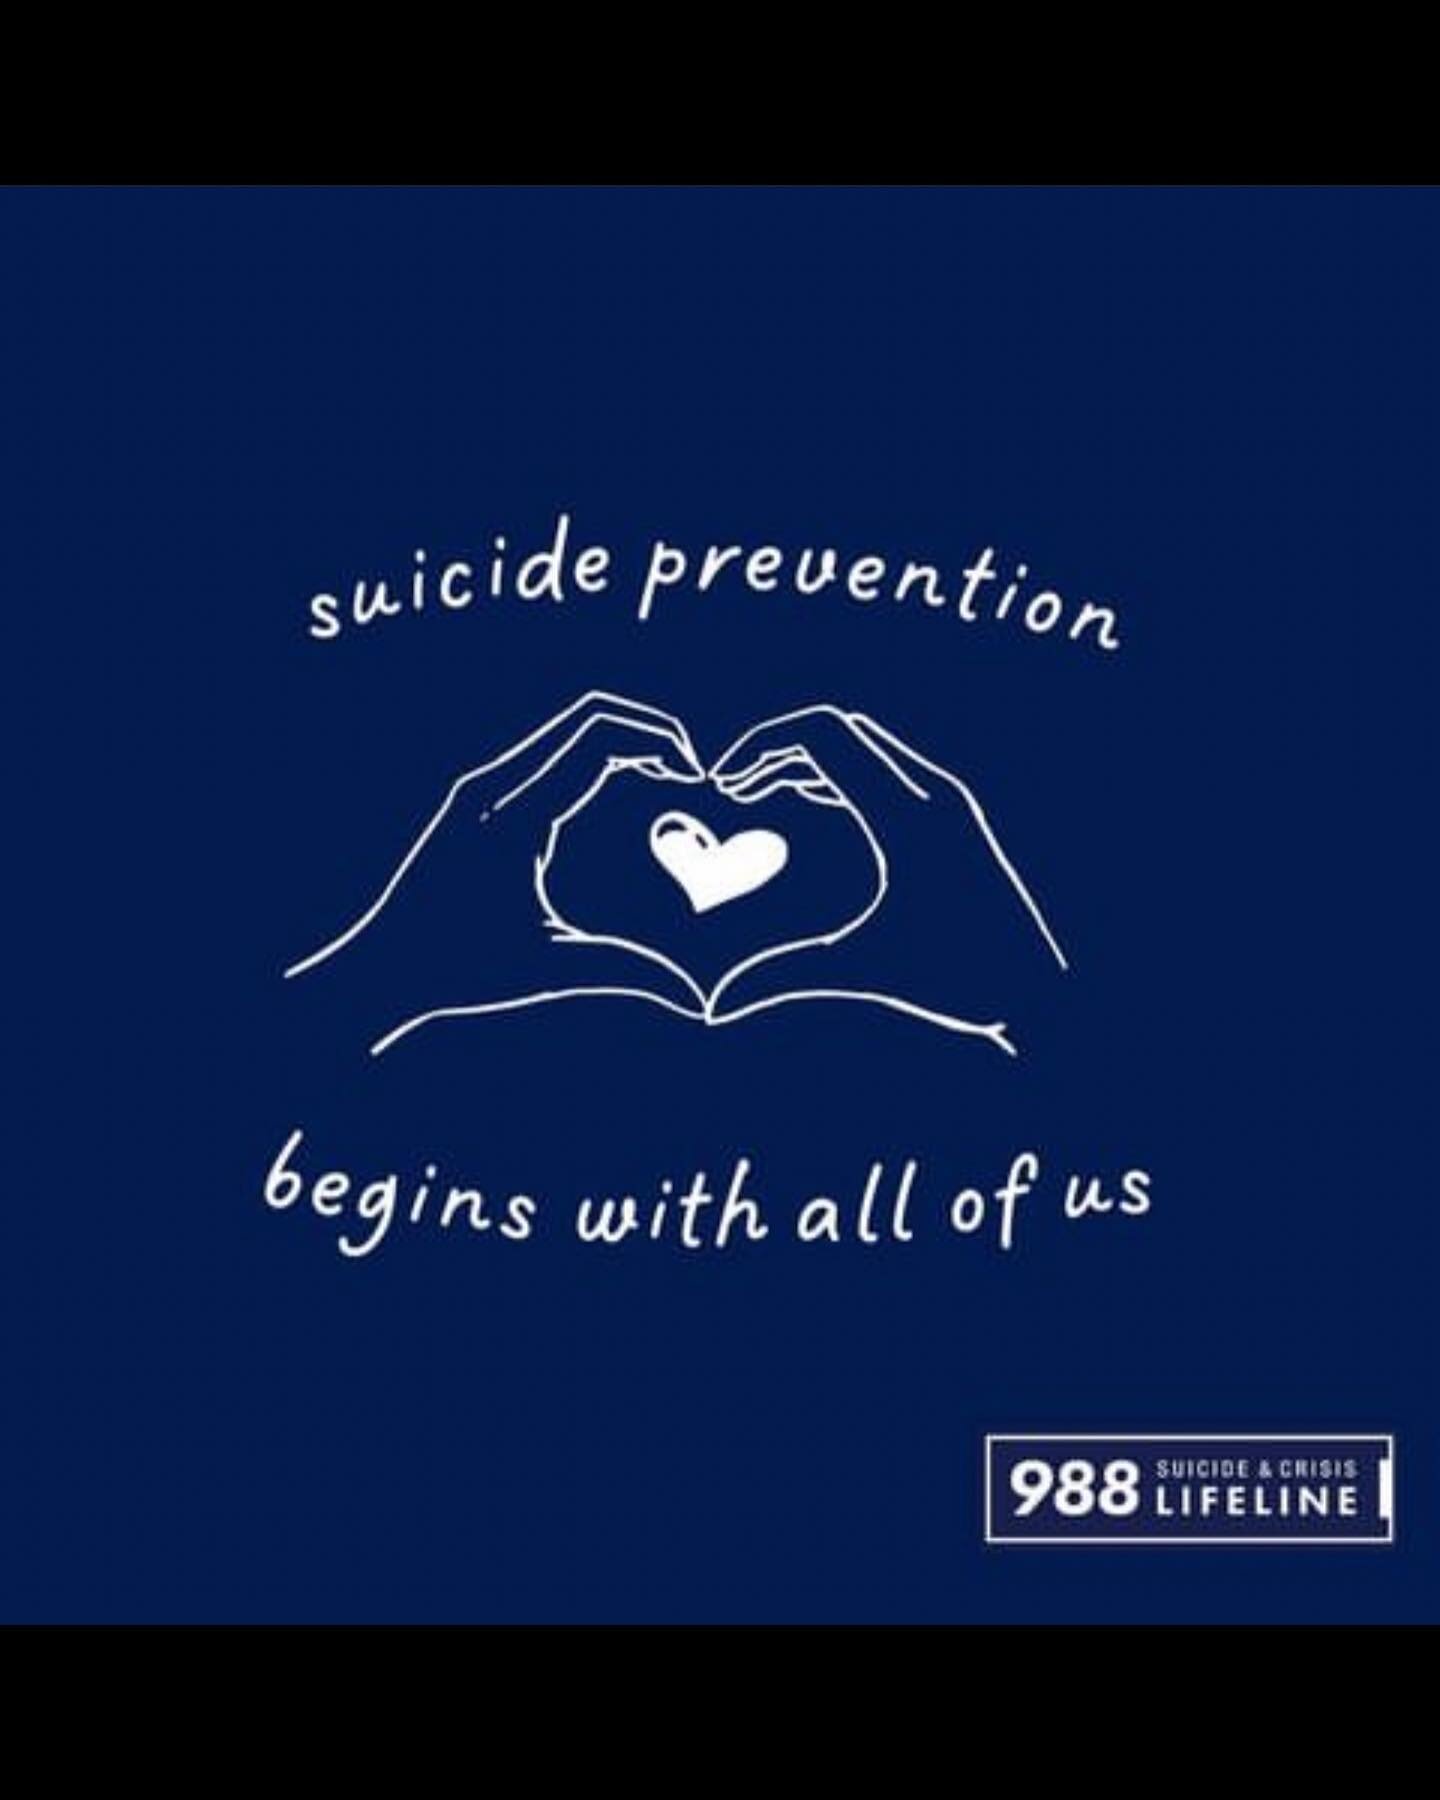 September is #suicidepreventionmonth

Those close to me know that we lost a dear friend to suicide. The experience shattered whatever thoughts I had, conscious and unconscious, around the topic. 

All I can do moving forward is to do my part in endin